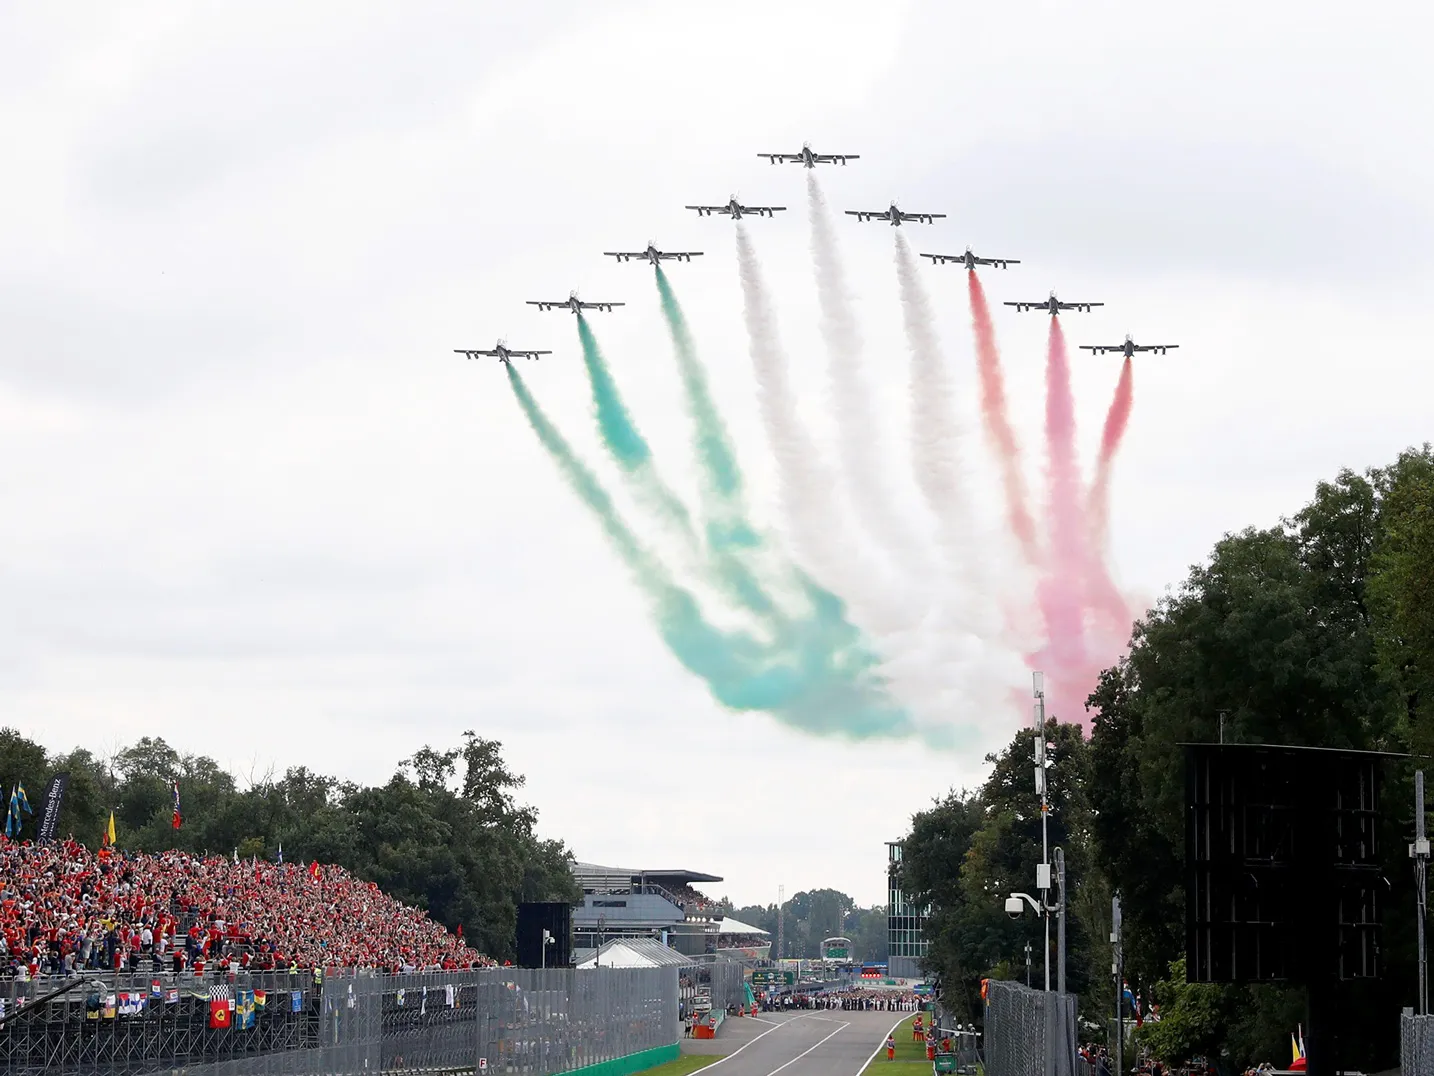 Watch the airshow over Monza at the F1 Italian Grand Prix from luxurious corporate hospitality